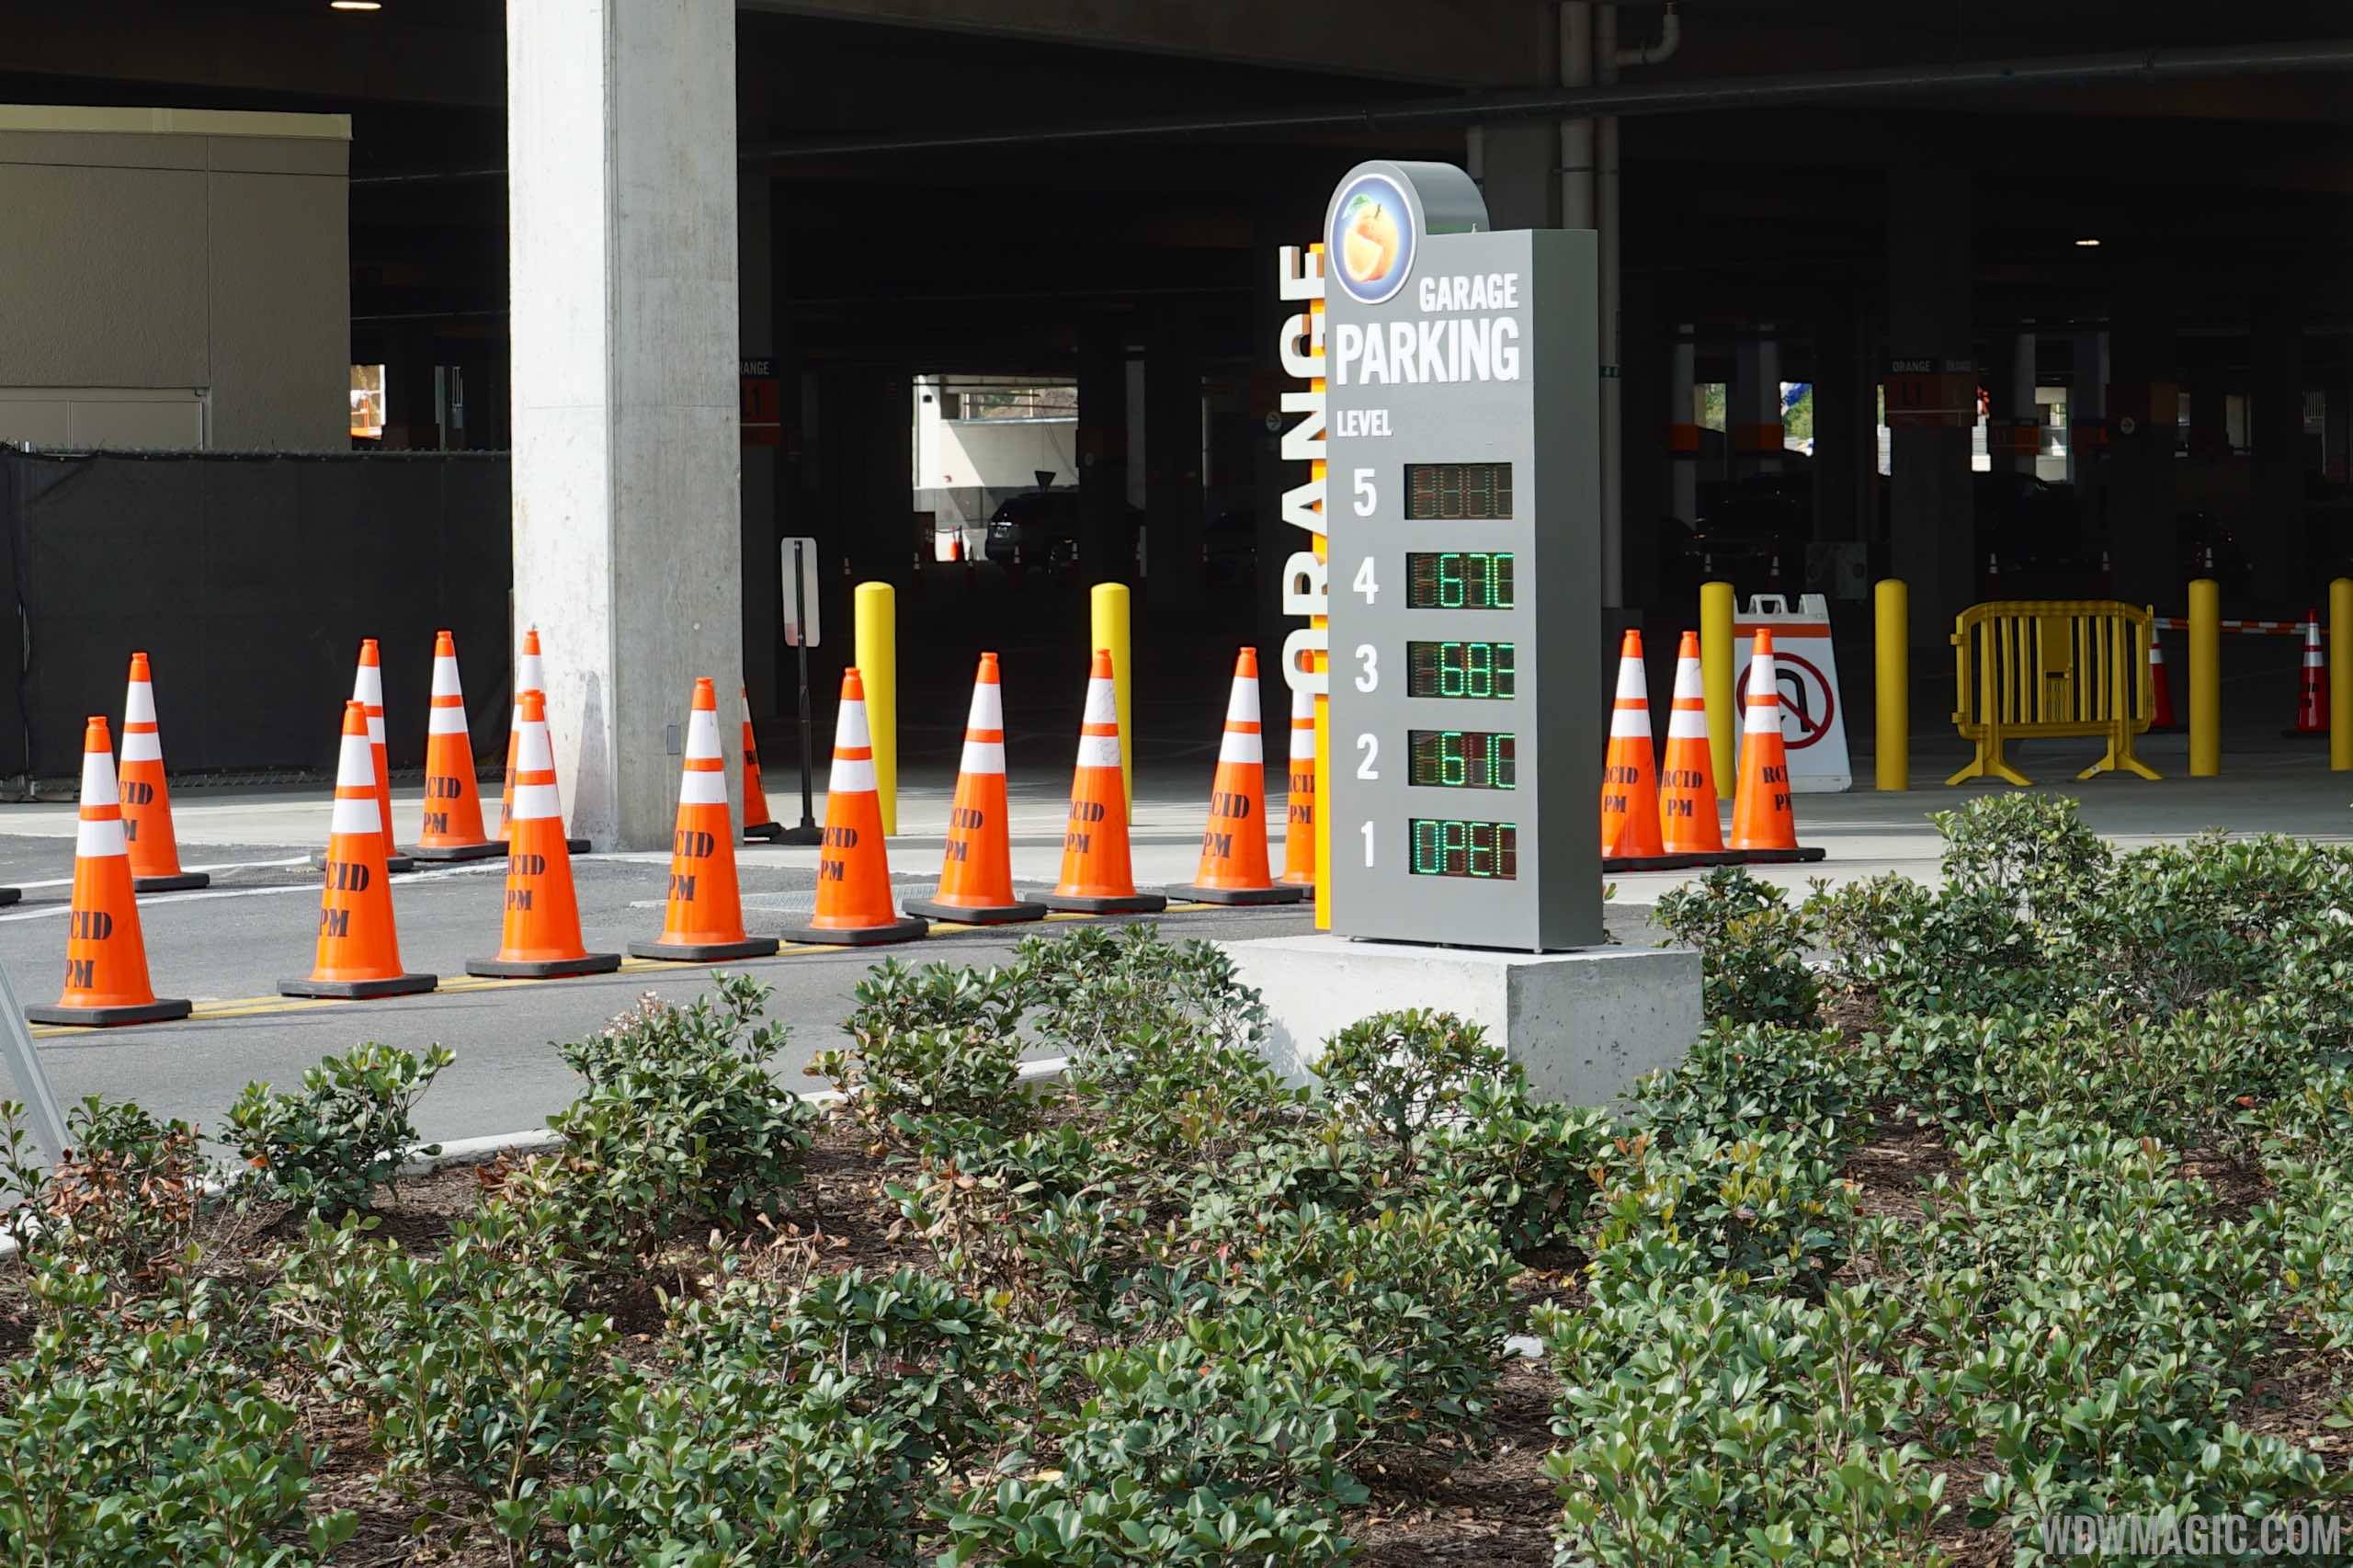 PHOTOS - Disney Springs West Side parking garage now testing the available space sensing technology